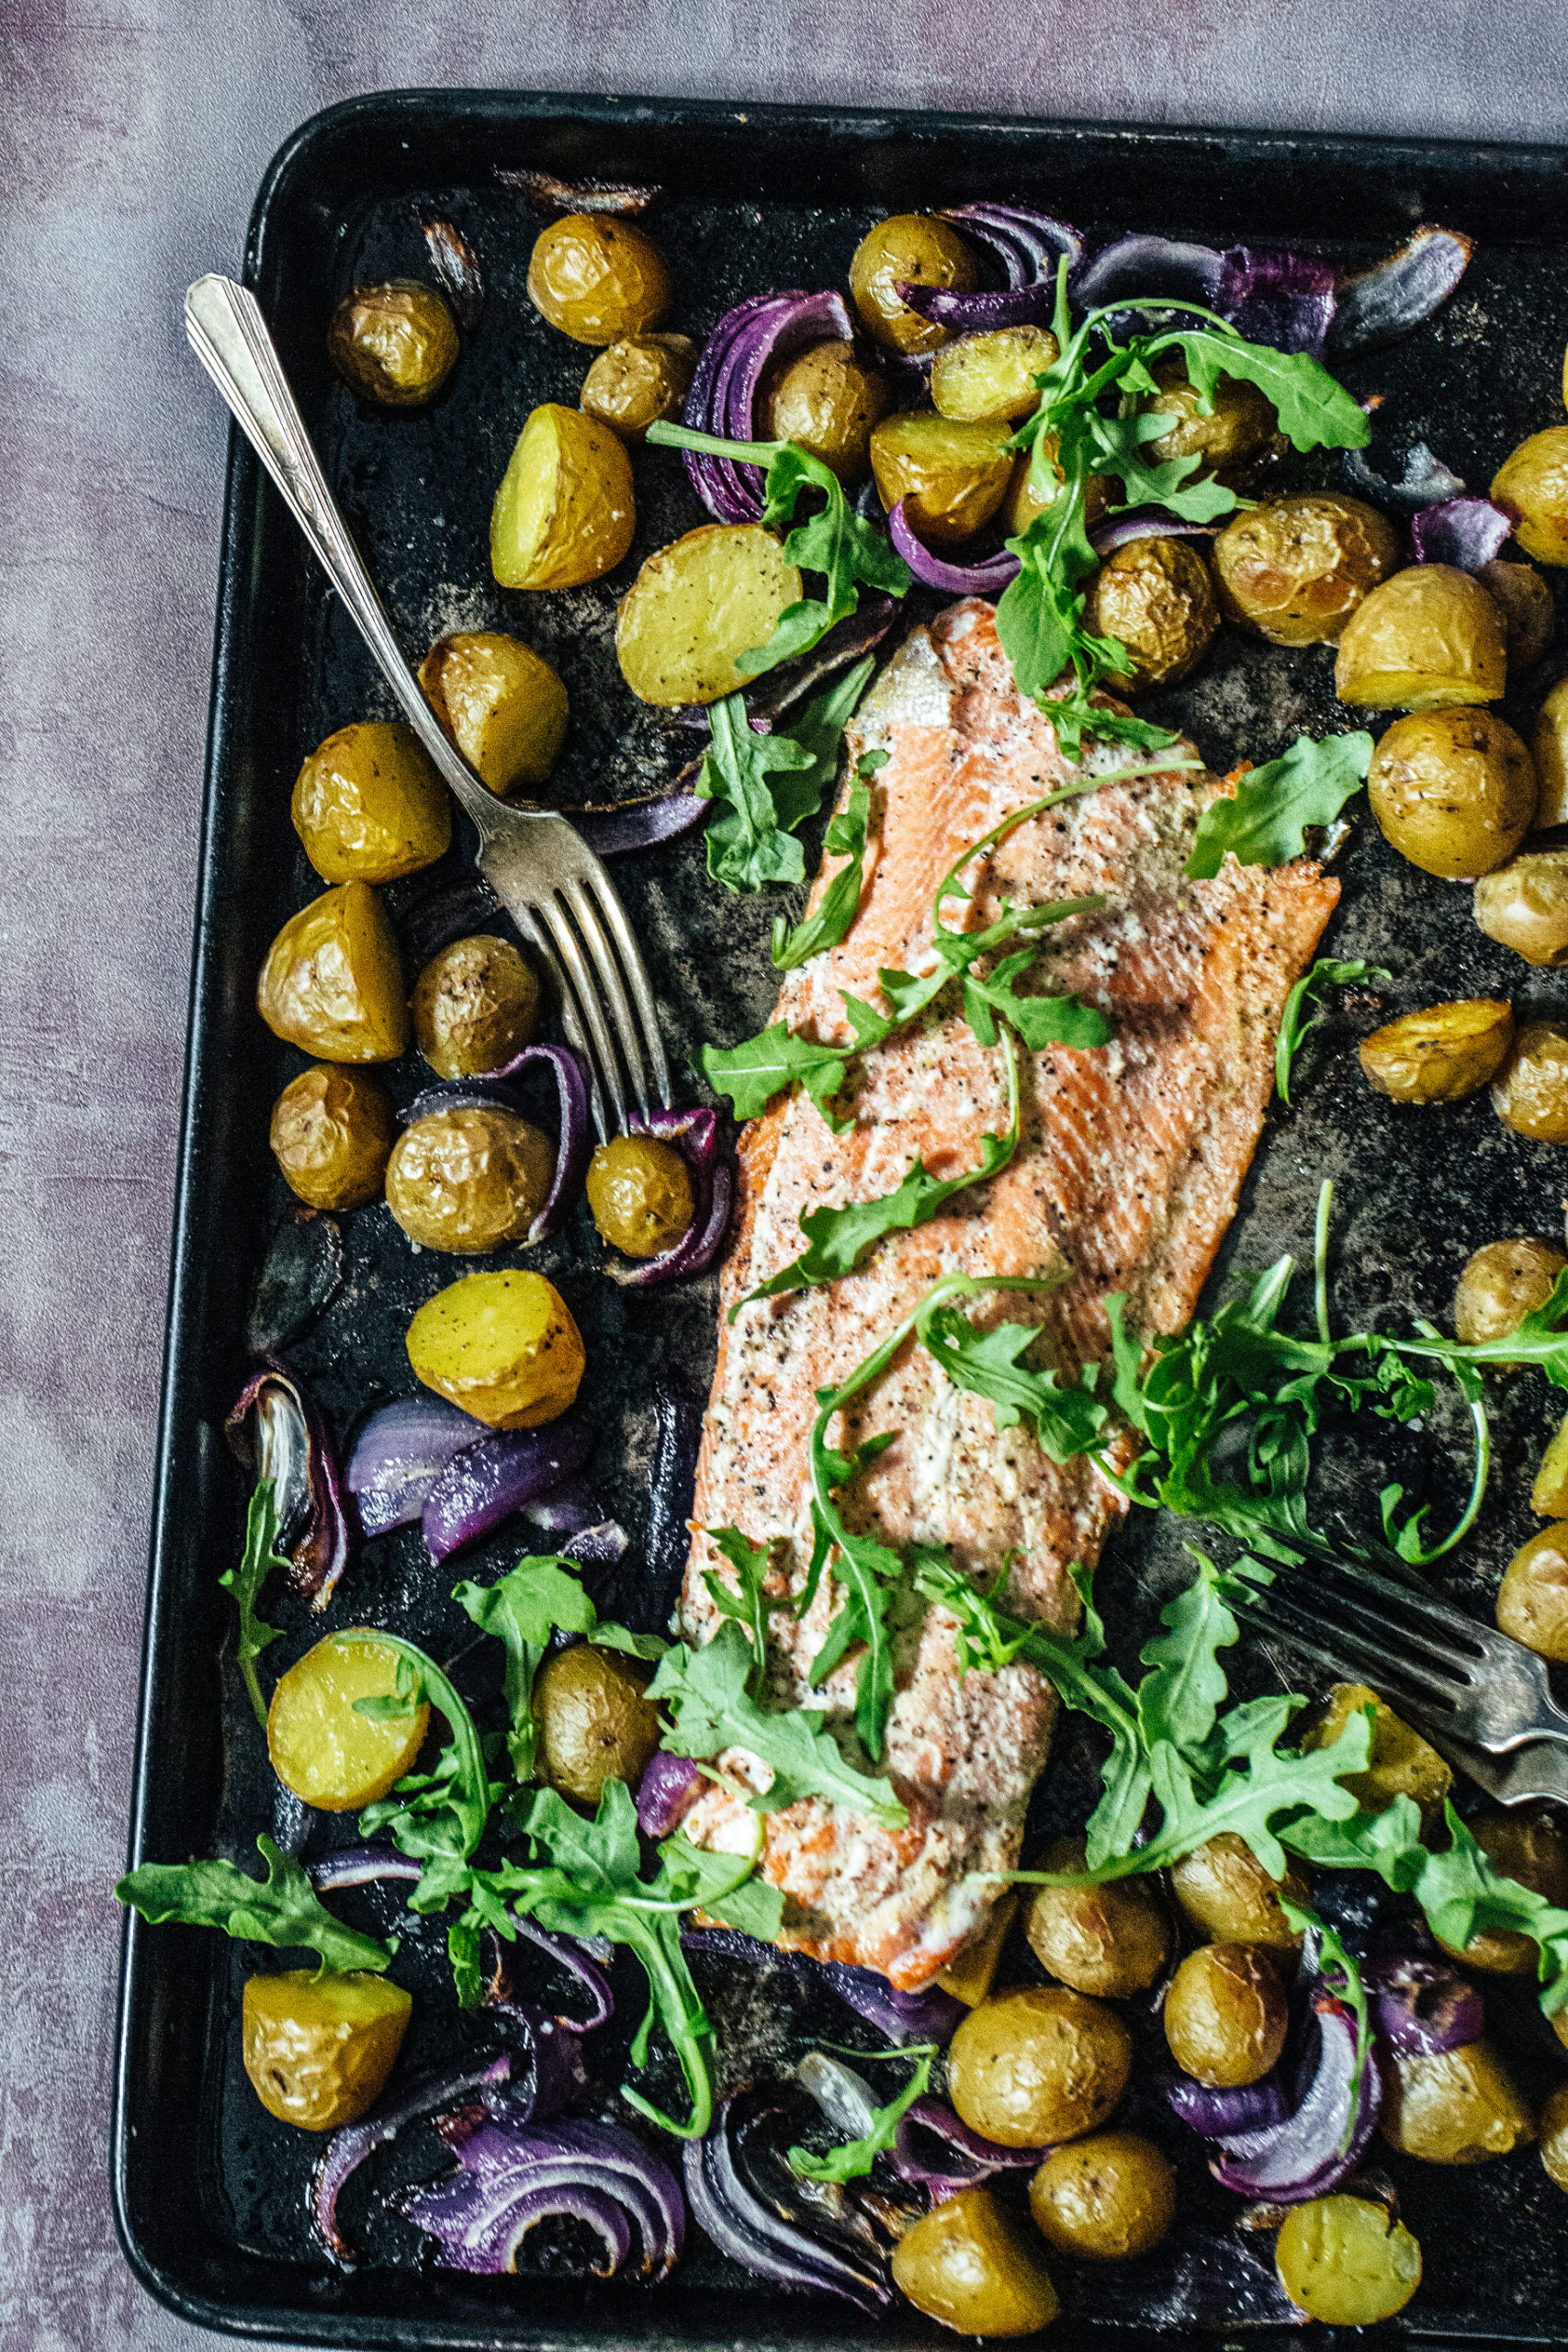 Simple Roasted Salmon & Veggies with Whipped Brown Butter Vinaigrette